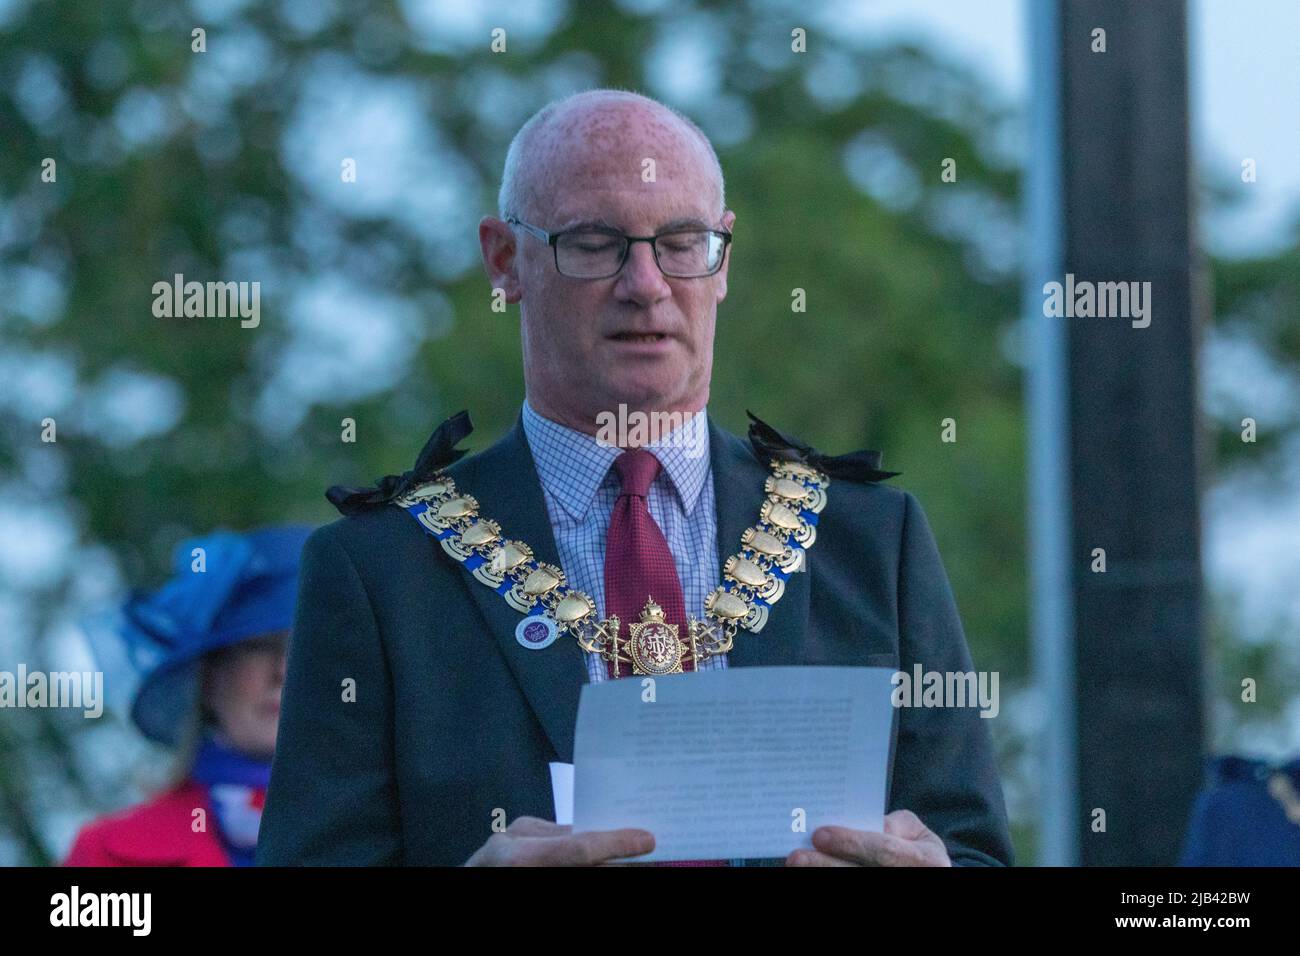 Southend on Sea, UK. 2nd June, 2022. Mayor of Southend, Kevin Robinson. A beacon is lit near the cenotaph in the city of Southend on Sea, to pay tribute and celebrate the Queens Platinum Jubilee. Penelope Barritt/Alamy Live News Stock Photo